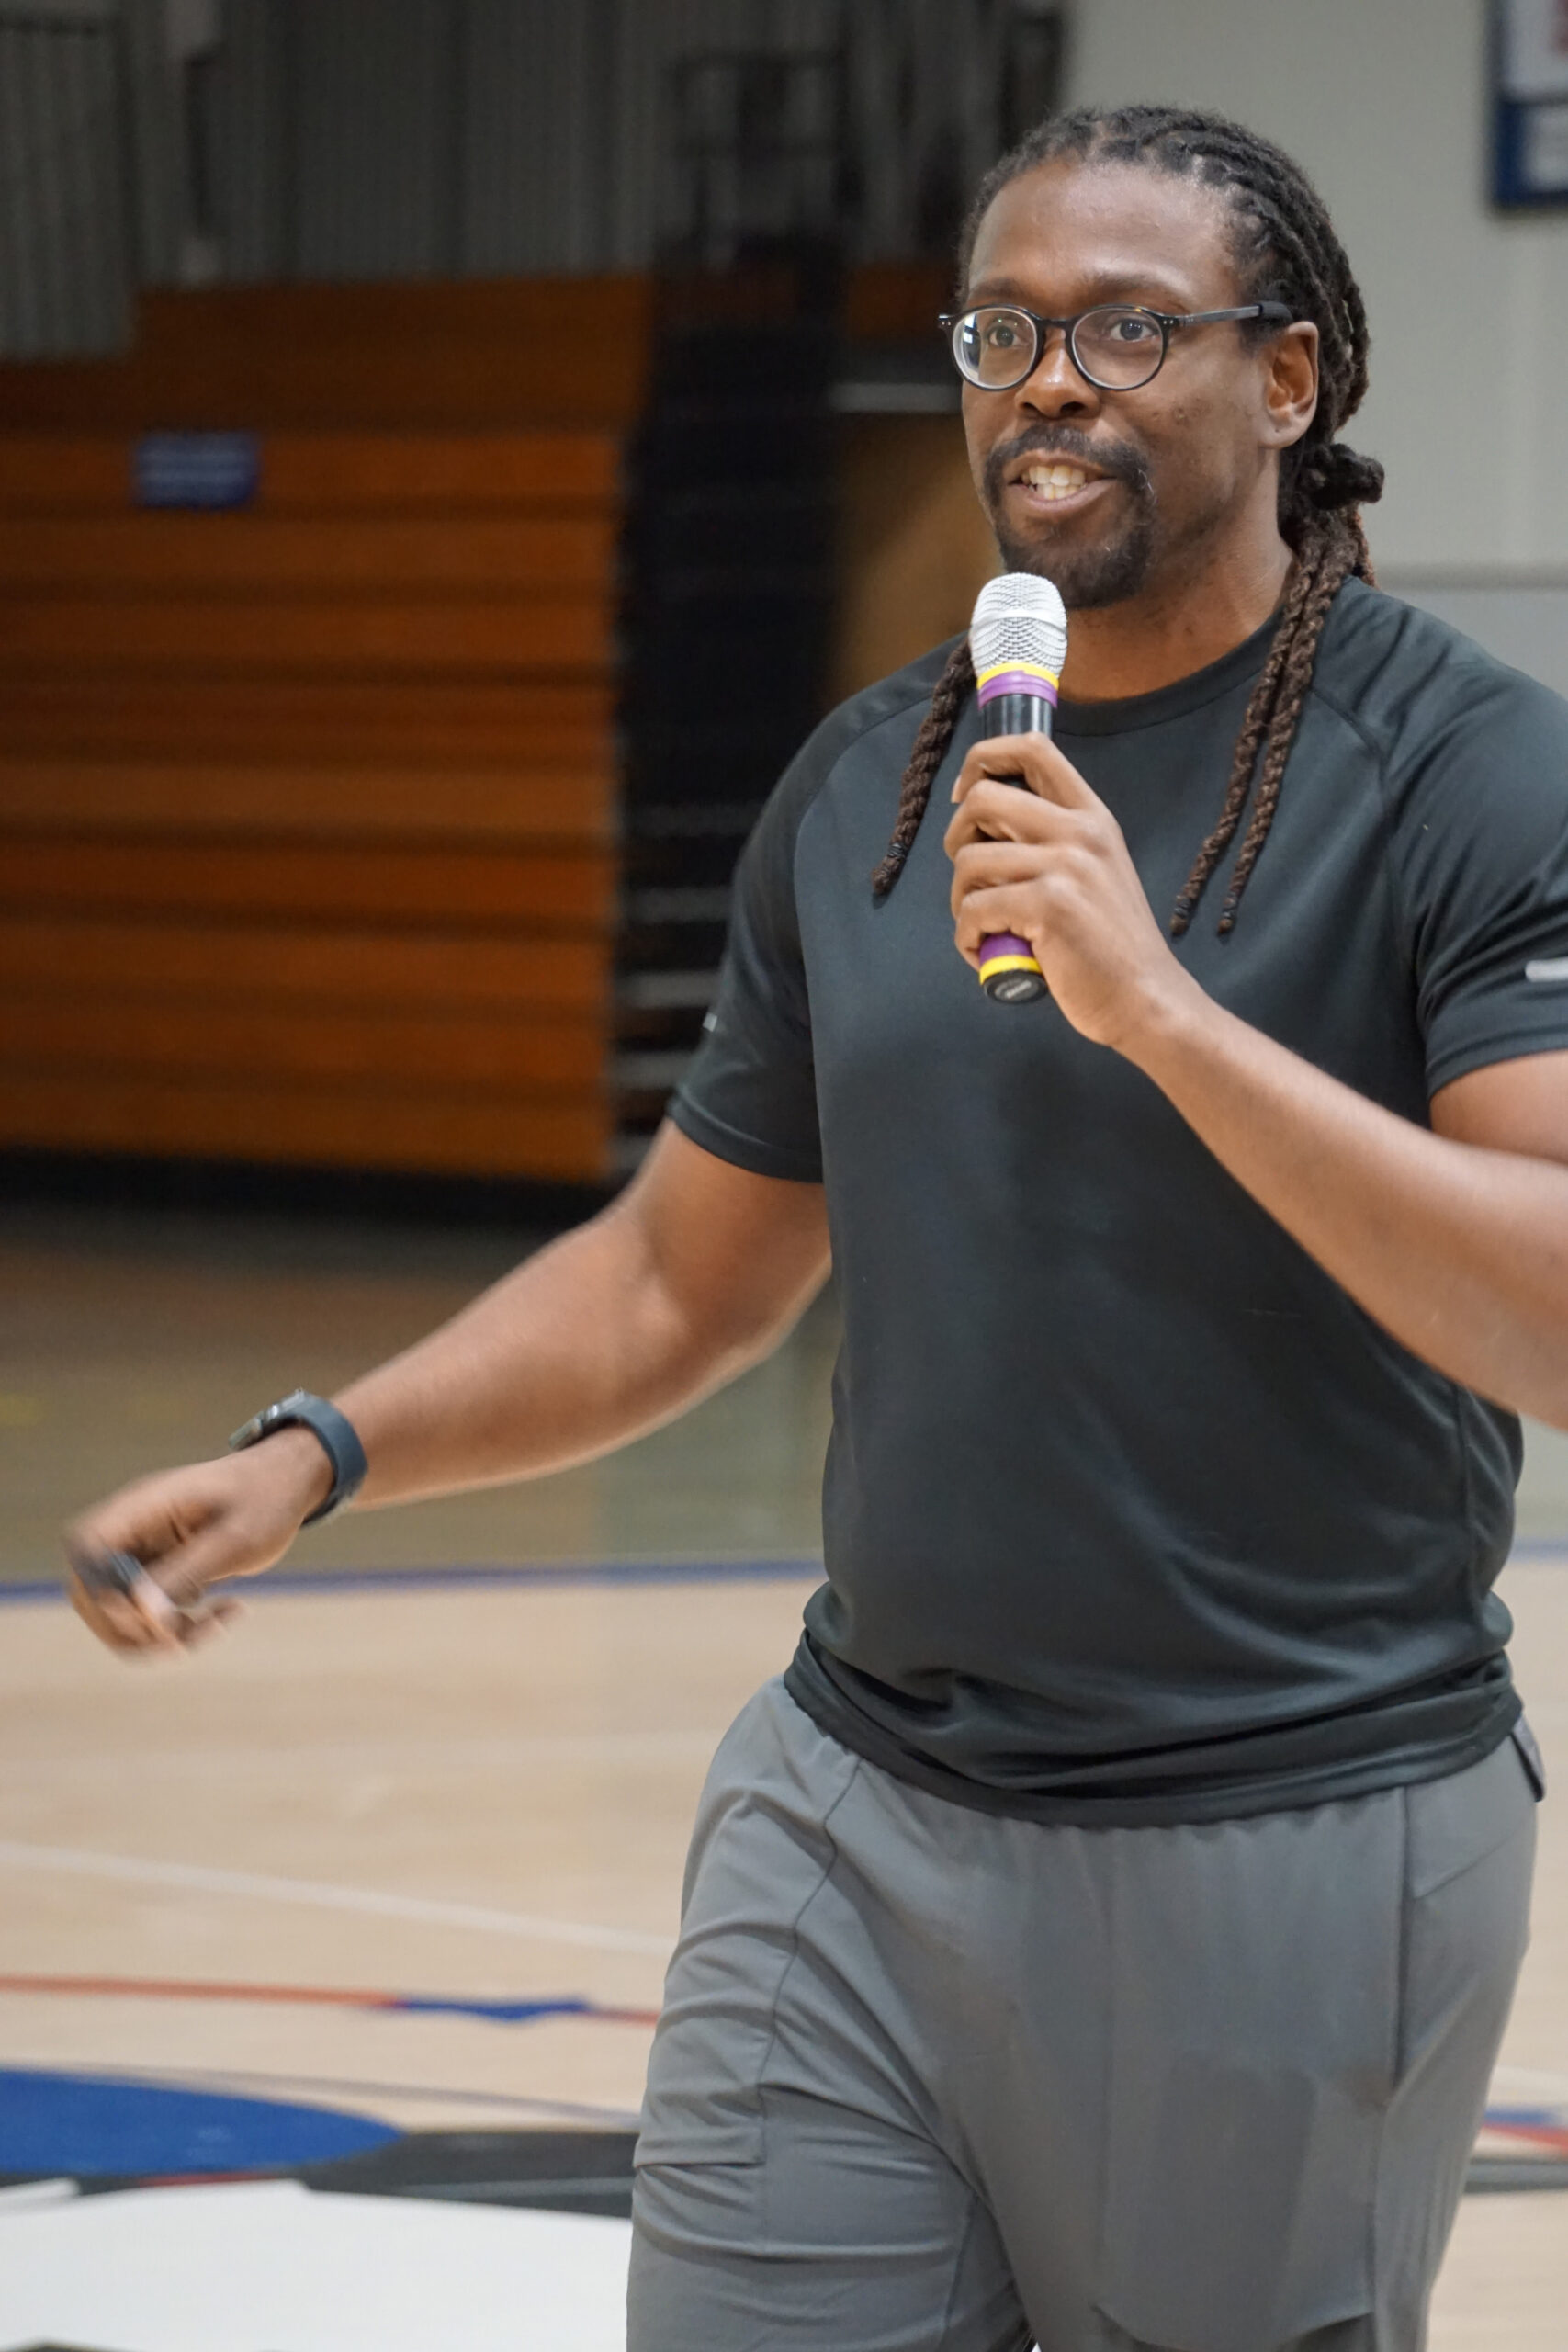 Cam Awesome inspires area students … “Mind your business!”